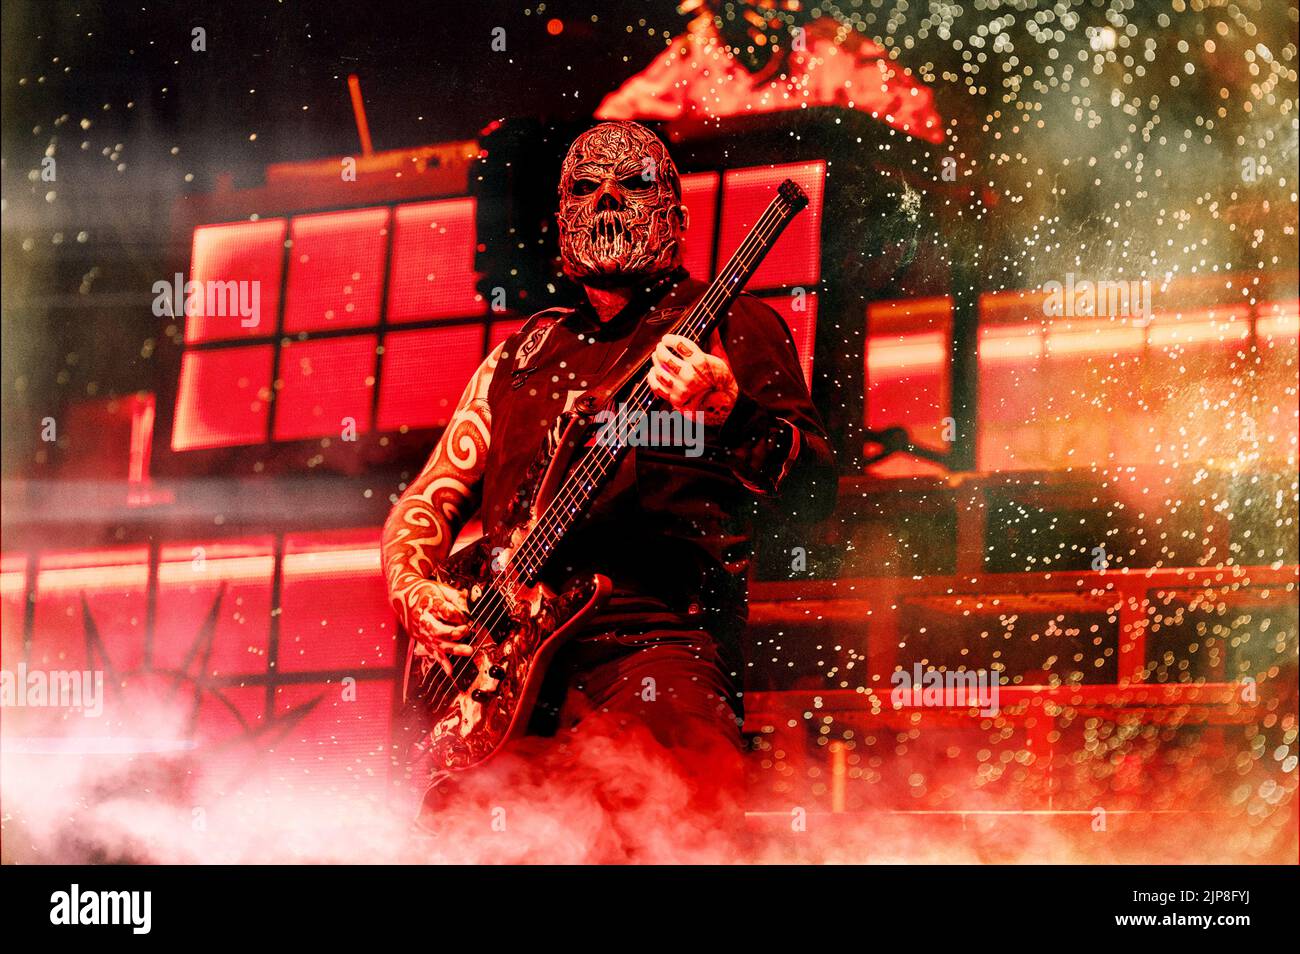 Malmoe, Sweden. 15th Aug, 2022. The American heavy metal band Slipknot performs a live concert at Malmö Arena in Malmoe. Here bass player Alessandro Venturella is seen live on stage. (Photo Credit: Gonzales Photo/Alamy Live News Stock Photo